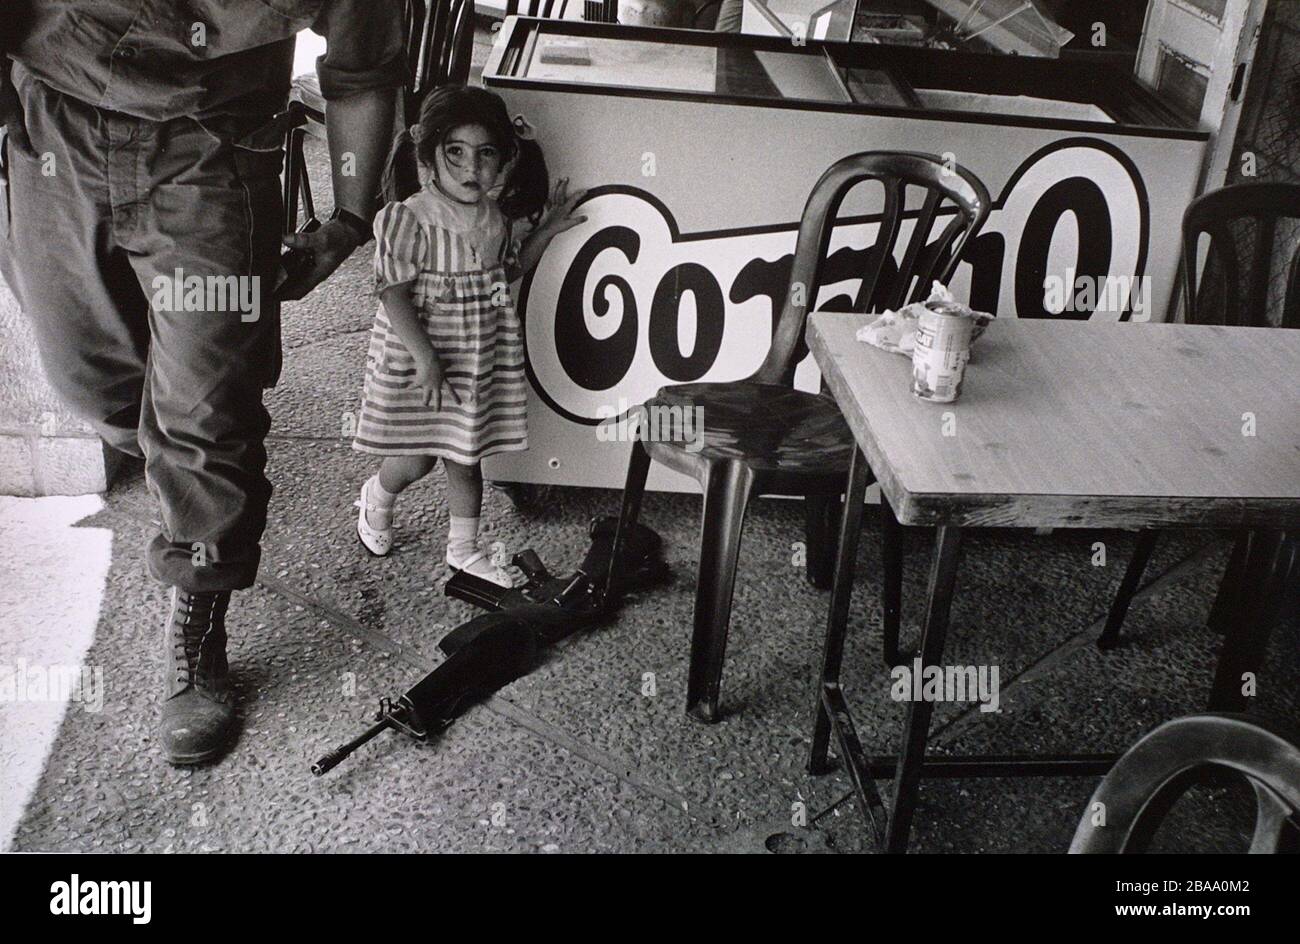 A young settler girl pointing to a gun belonging to a soldier from the Israel Defense Force (IDF) at a cafe in the West Bank settlement of Kiryat Arba near Hebron. In 1994 a settler named Baruch Goldstein shot dead 29 Palestinians in the nearby city of Hebron. Israel occupied the West Bank, Gaza and Golan Heights in the aftermath of the Six-Day-War of 1967. Stock Photo